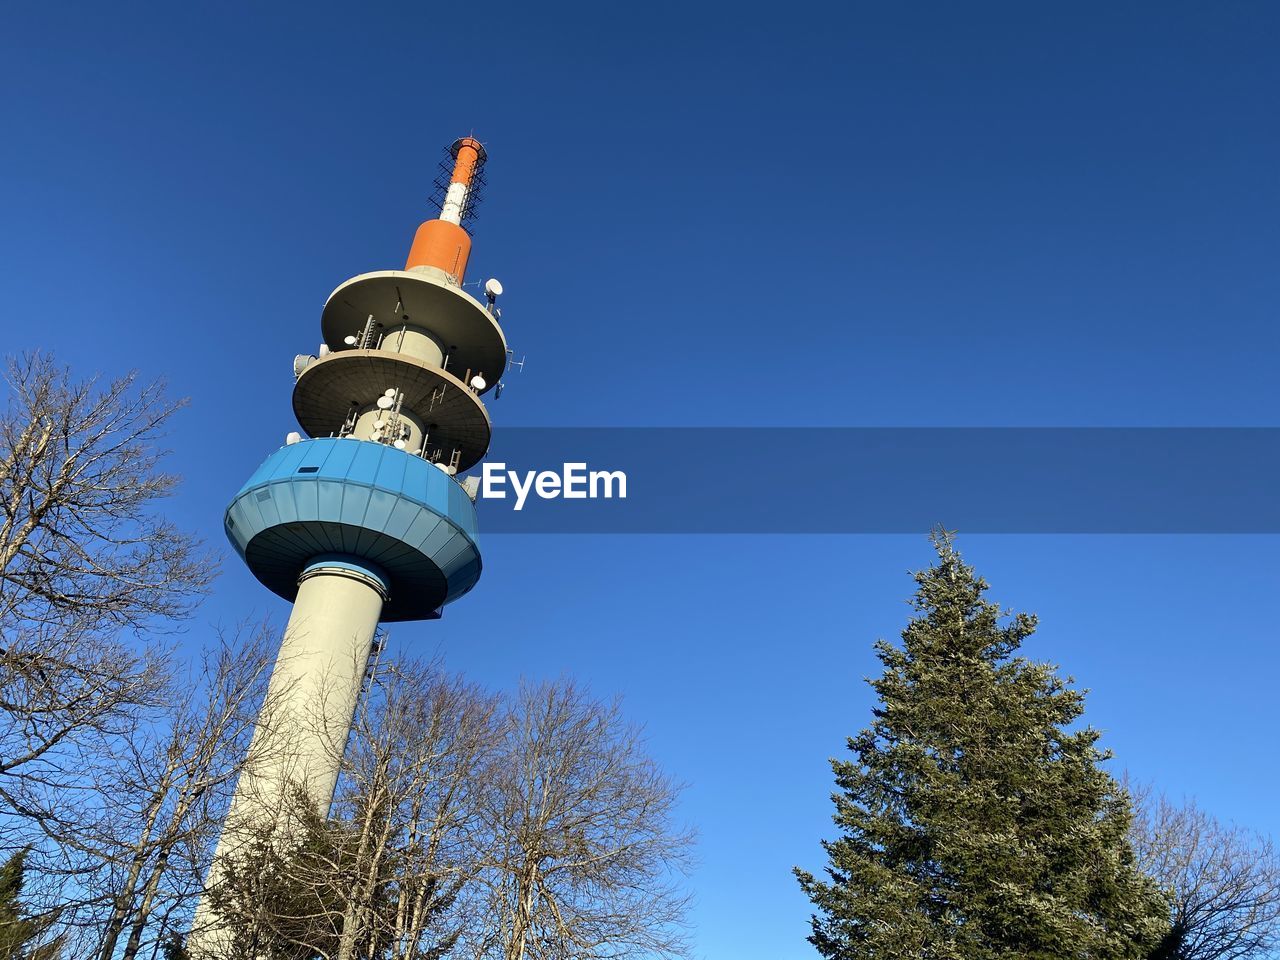 sky, tree, blue, clear sky, tower, low angle view, plant, nature, architecture, no people, built structure, communications tower, day, communication, street light, travel destinations, outdoors, sunny, building exterior, travel